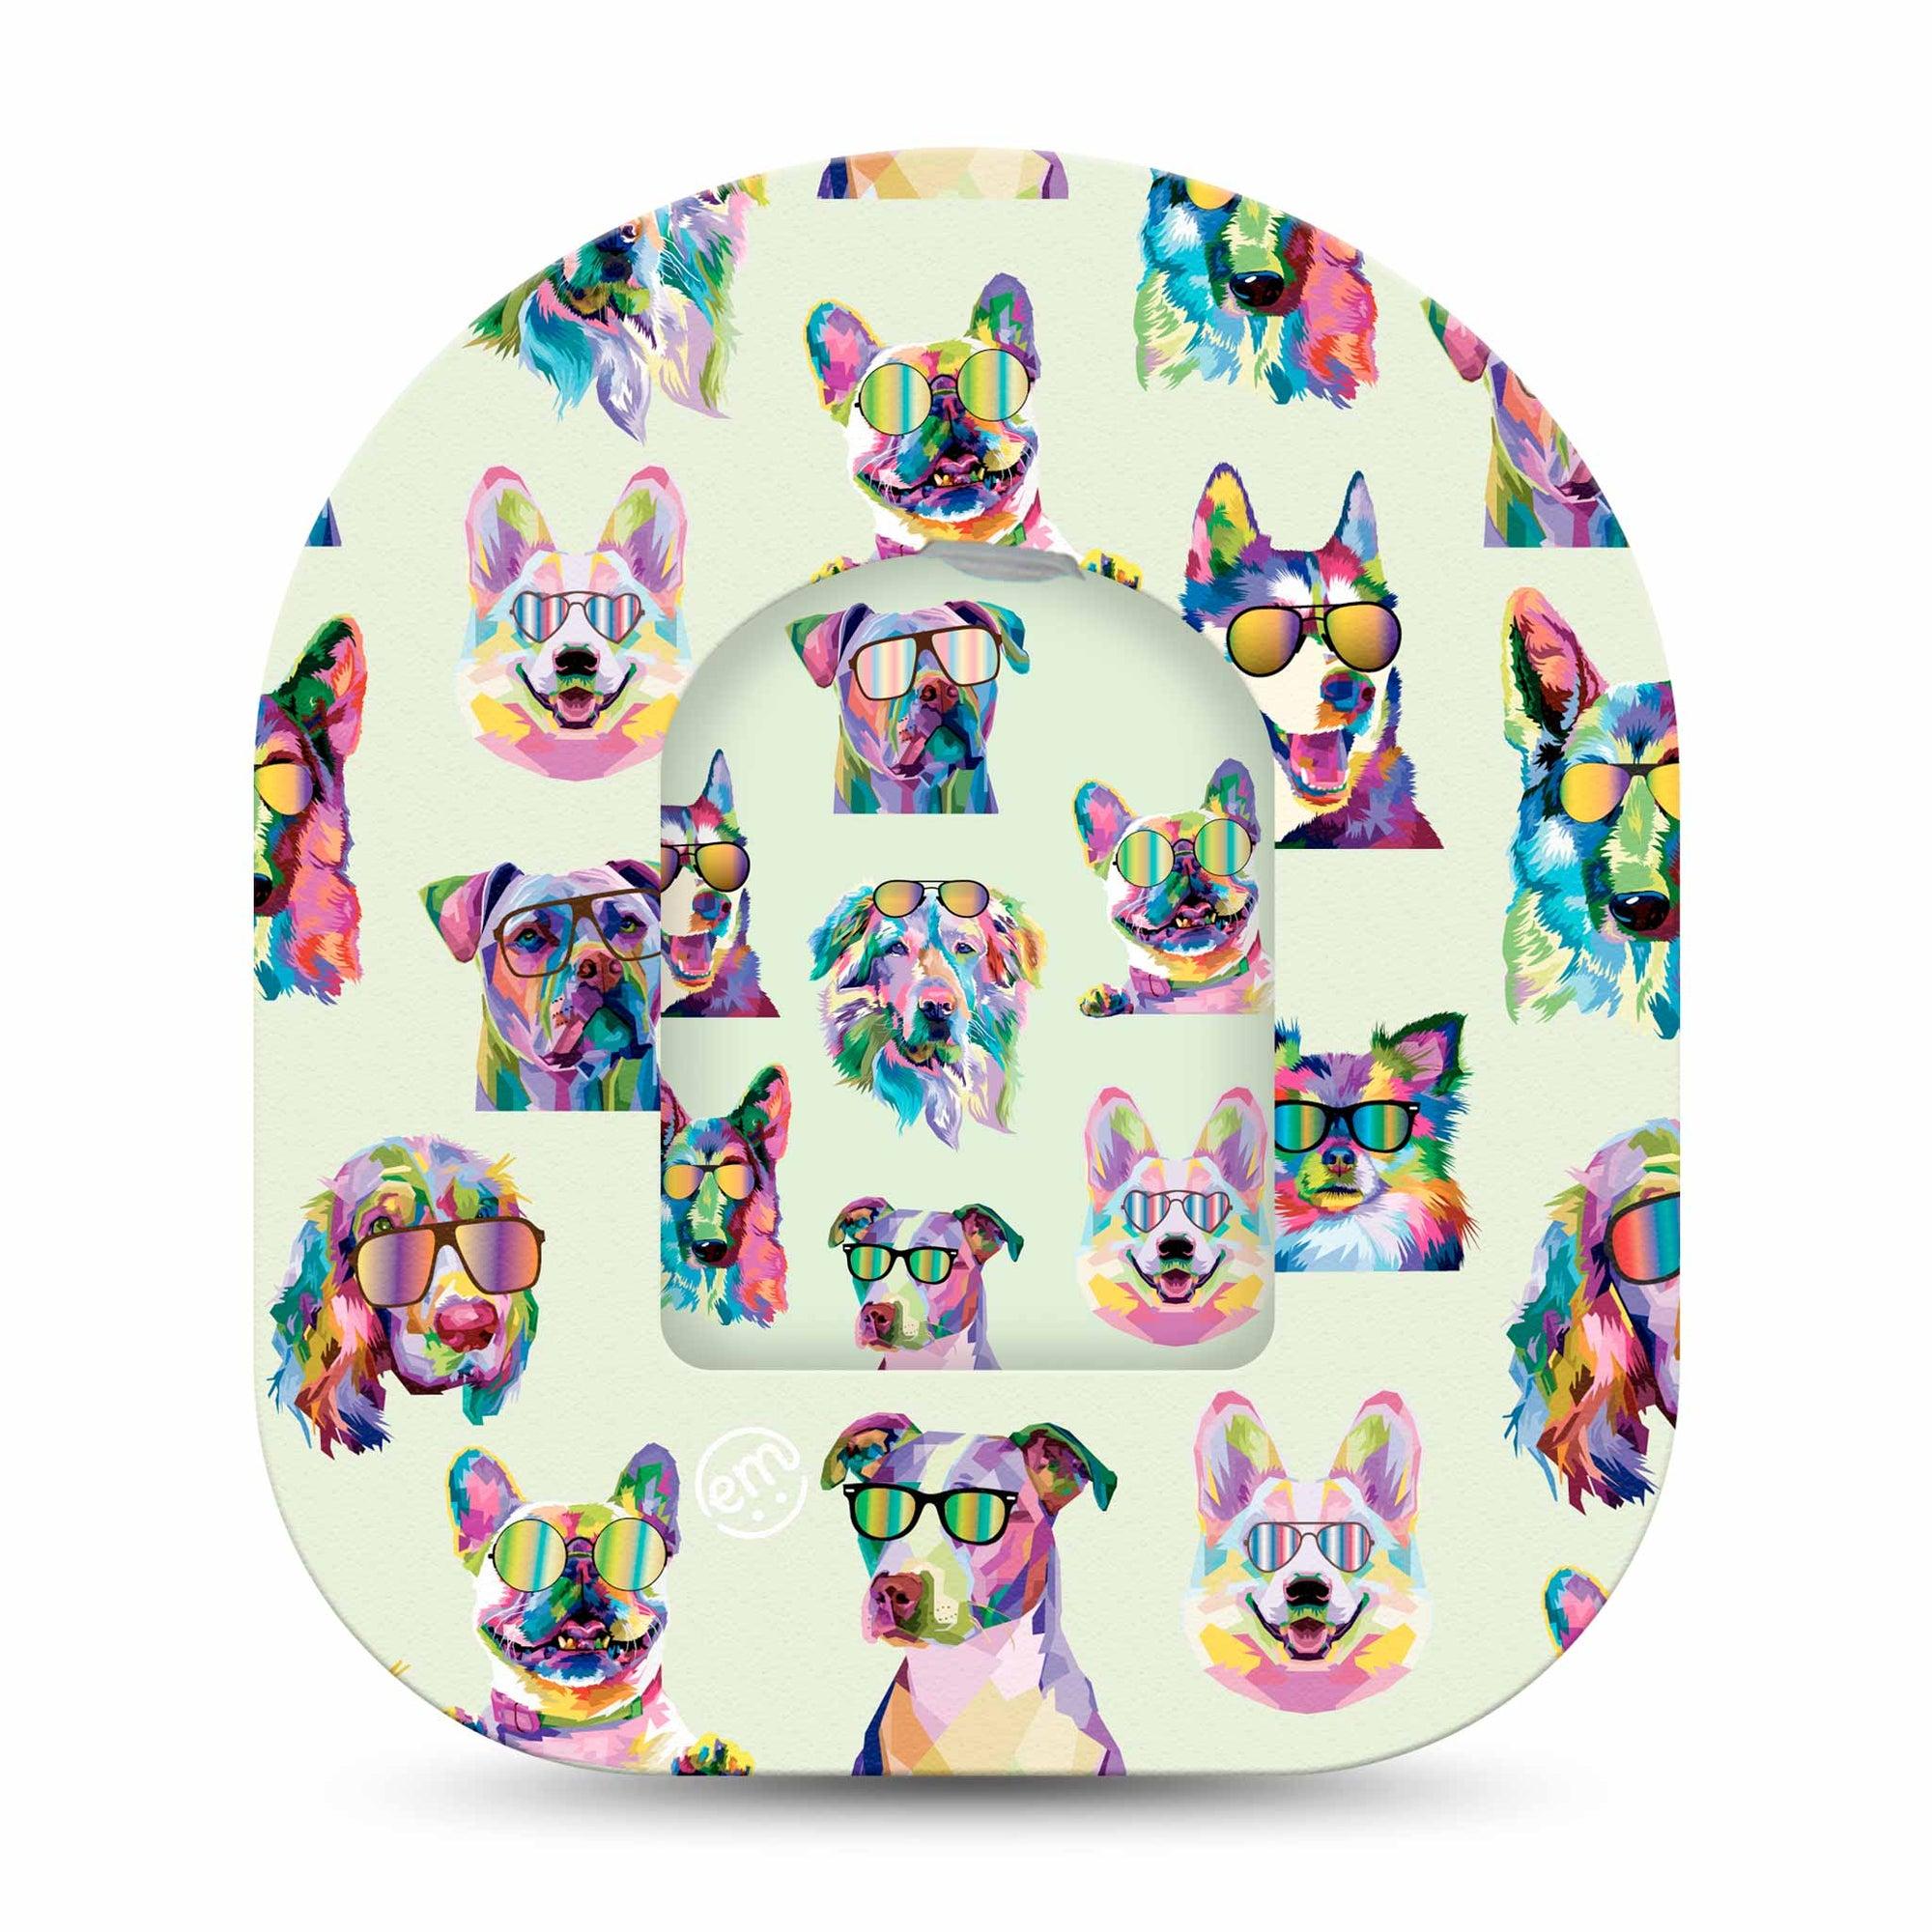 ExpressionMed Dog Party Omnipod Pump Sticker and Matching Pod Adhesive Patch Single Sticker Only Neon shaded dogs Vinyl Pump Design